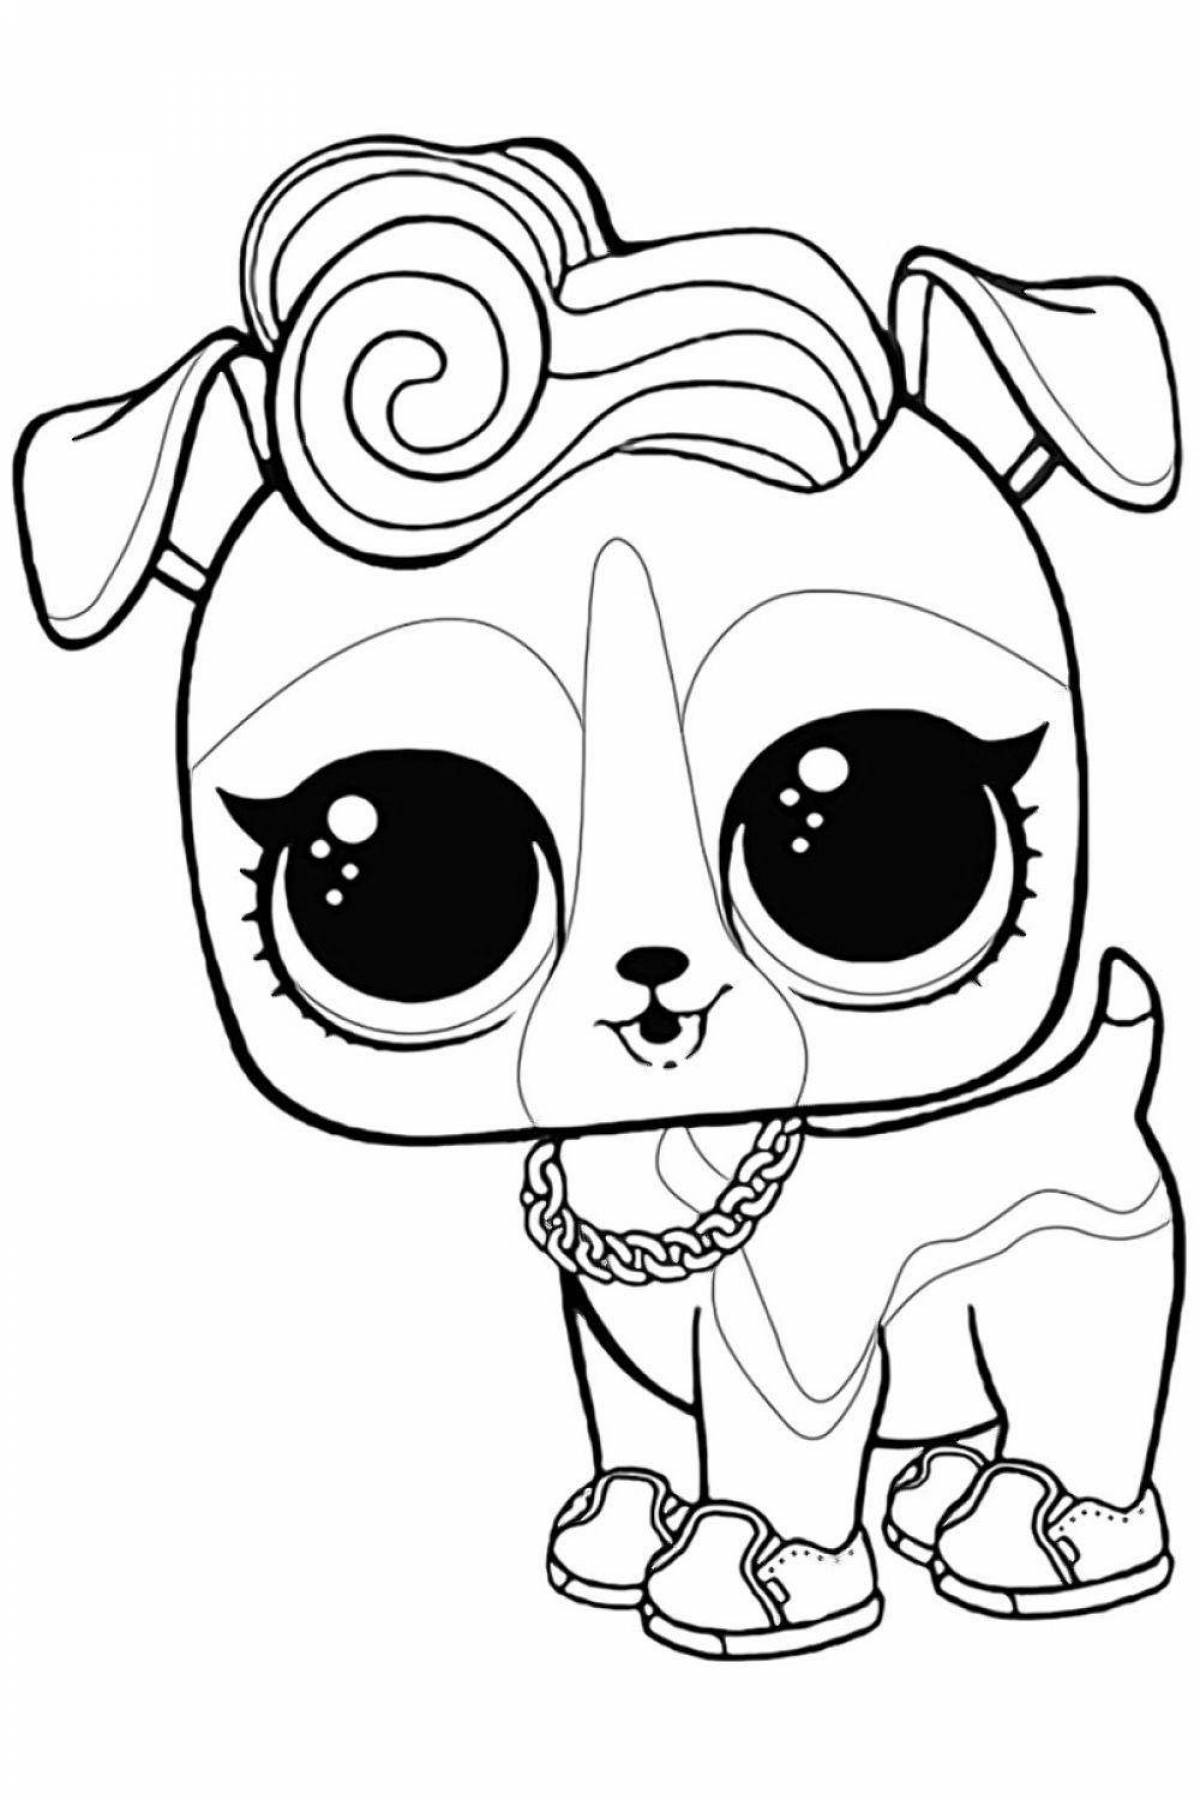 Cute lol animal coloring pages